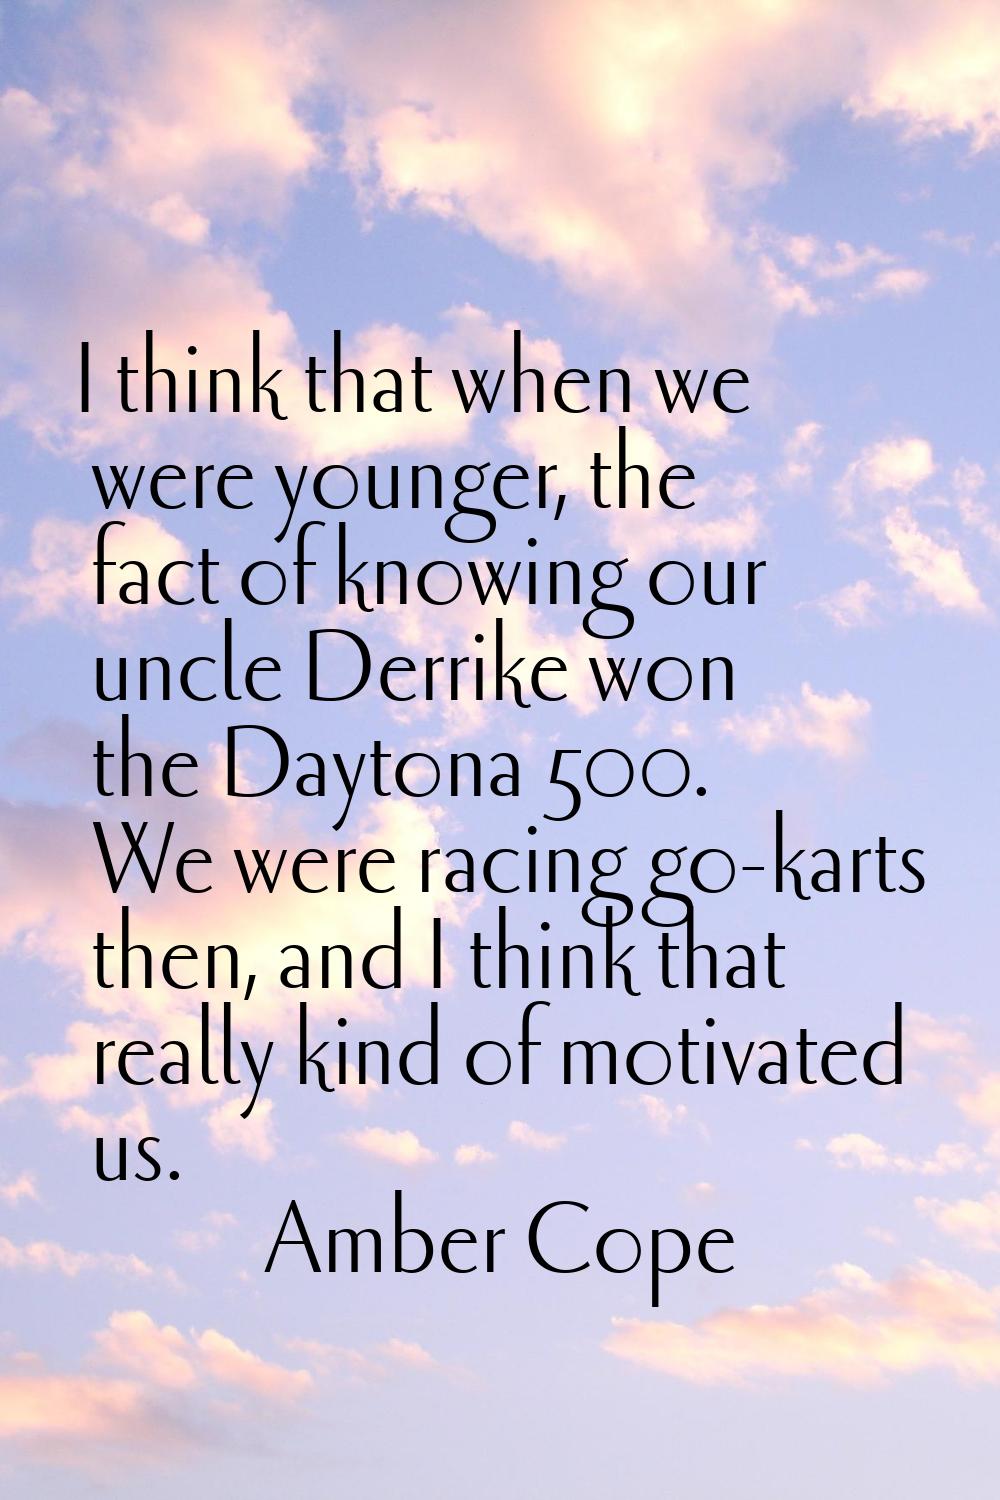 I think that when we were younger, the fact of knowing our uncle Derrike won the Daytona 500. We we